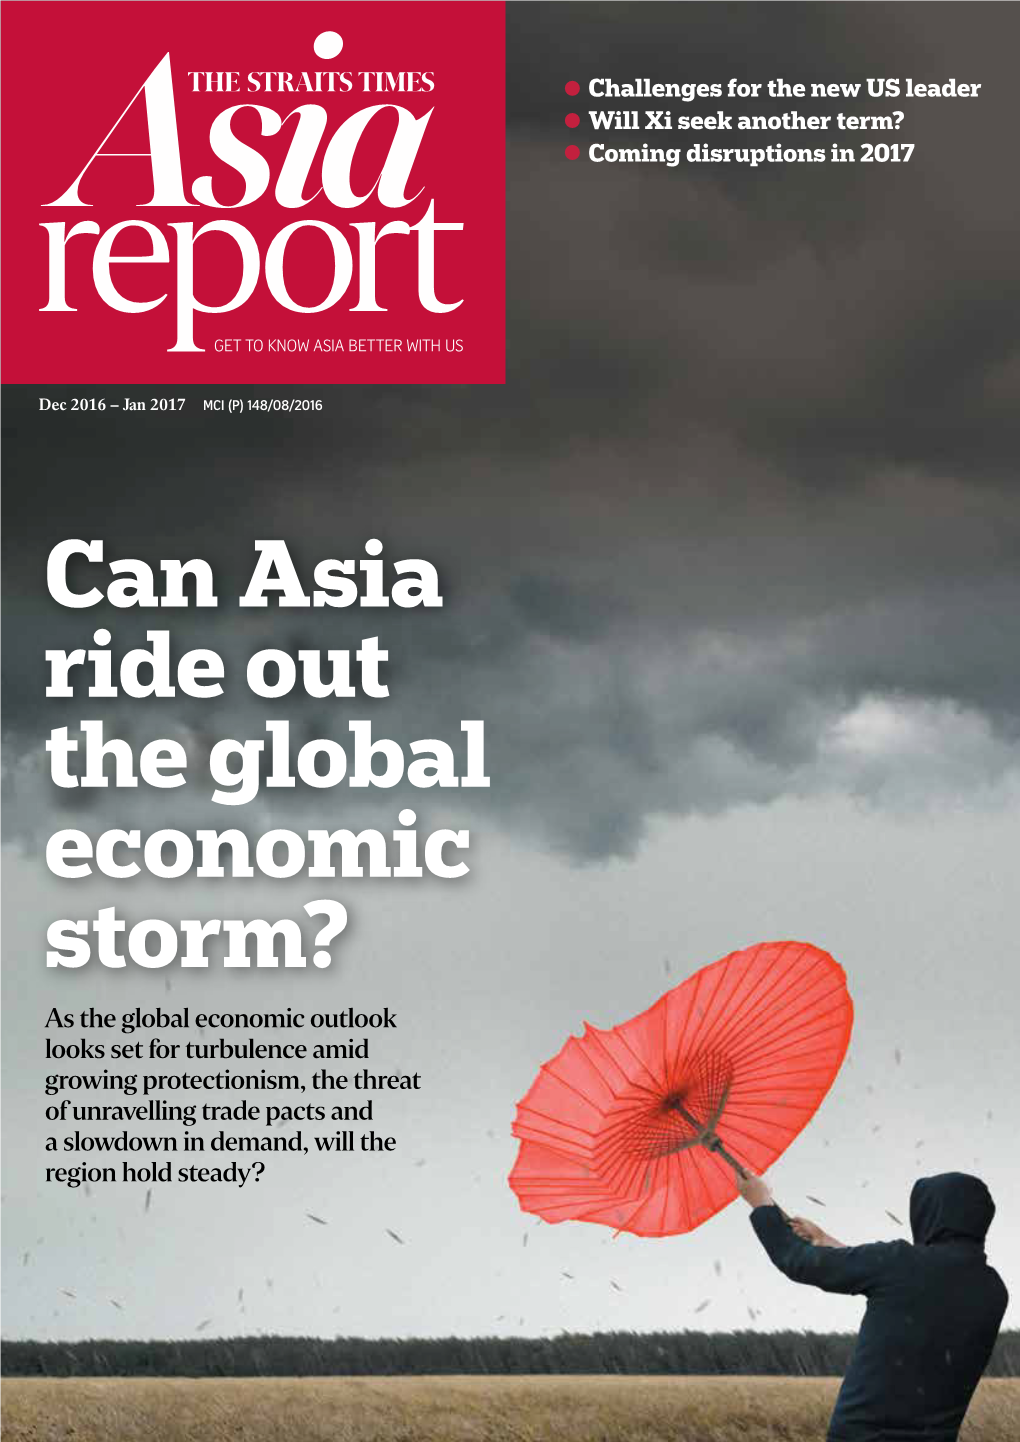 Can Asia Ride out the Global Economic Storm?